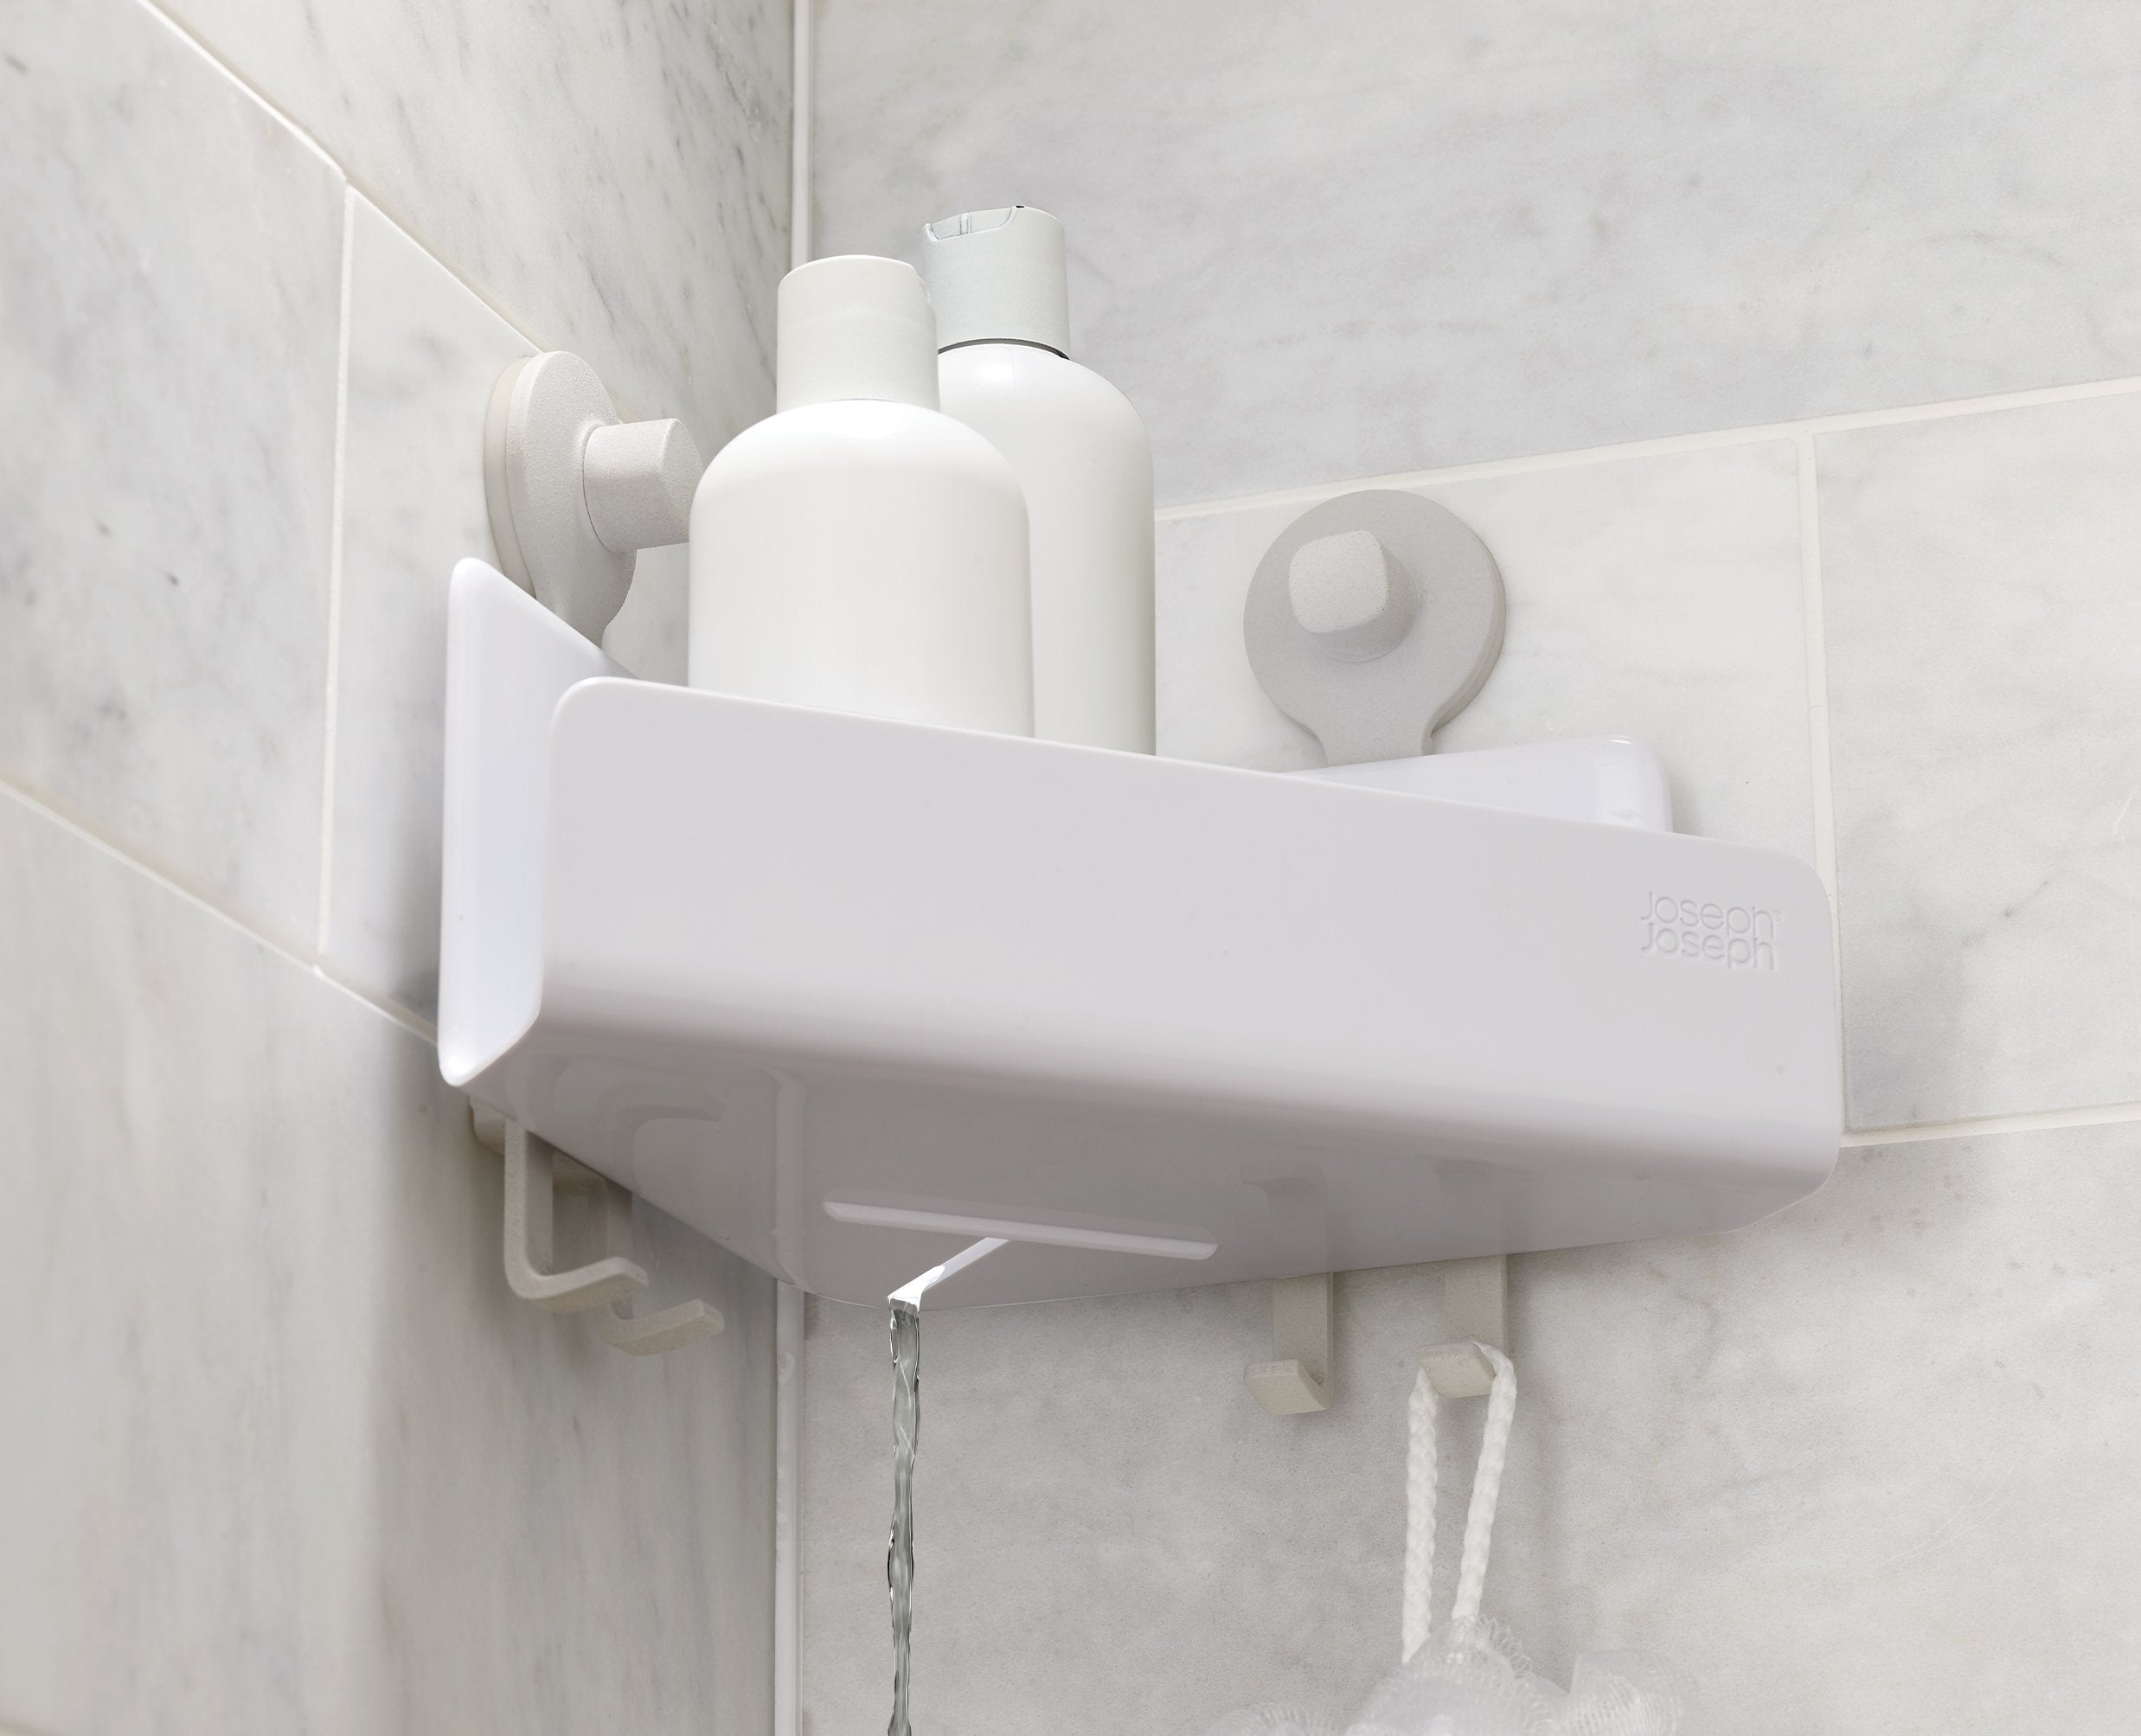 BEON.COM.AU  These corner shower shelves sit neatly in the corner of your shower to store your soap bars, shower gels and shampoo bottles and feature hooks for razors, sponges and flannels.  Self-draining design Handy storage hooks Lift-off shelf for easy cleaning  Easy tool-free installation using super-gri... Joseph Joseph at BEON.COM.AU